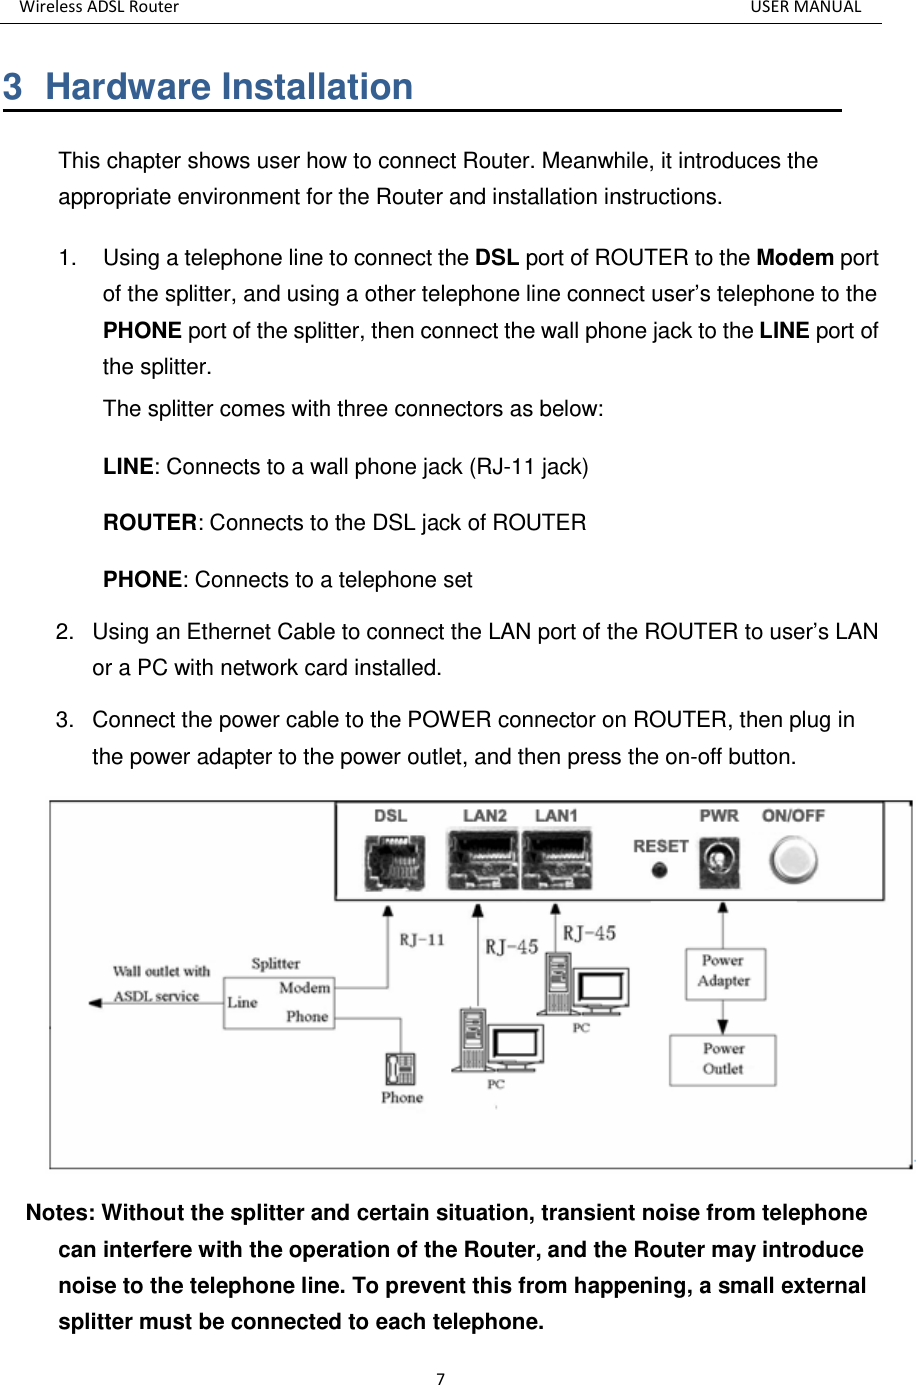 Wireless ADSL Router          USER MANUAL 7 3  Hardware Installation This chapter shows user how to connect Router. Meanwhile, it introduces the appropriate environment for the Router and installation instructions.   1.  Using a telephone line to connect the DSL port of ROUTER to the Modem port of the splitter, and using a other telephone line connect user’s telephone to the PHONE port of the splitter, then connect the wall phone jack to the LINE port of the splitter. The splitter comes with three connectors as below: LINE: Connects to a wall phone jack (RJ-11 jack) ROUTER: Connects to the DSL jack of ROUTER PHONE: Connects to a telephone set 2.  Using an Ethernet Cable to connect the LAN port of the ROUTER to user’s LAN or a PC with network card installed.   3.  Connect the power cable to the POWER connector on ROUTER, then plug in the power adapter to the power outlet, and then press the on-off button.  Notes: Without the splitter and certain situation, transient noise from telephone can interfere with the operation of the Router, and the Router may introduce noise to the telephone line. To prevent this from happening, a small external splitter must be connected to each telephone. 